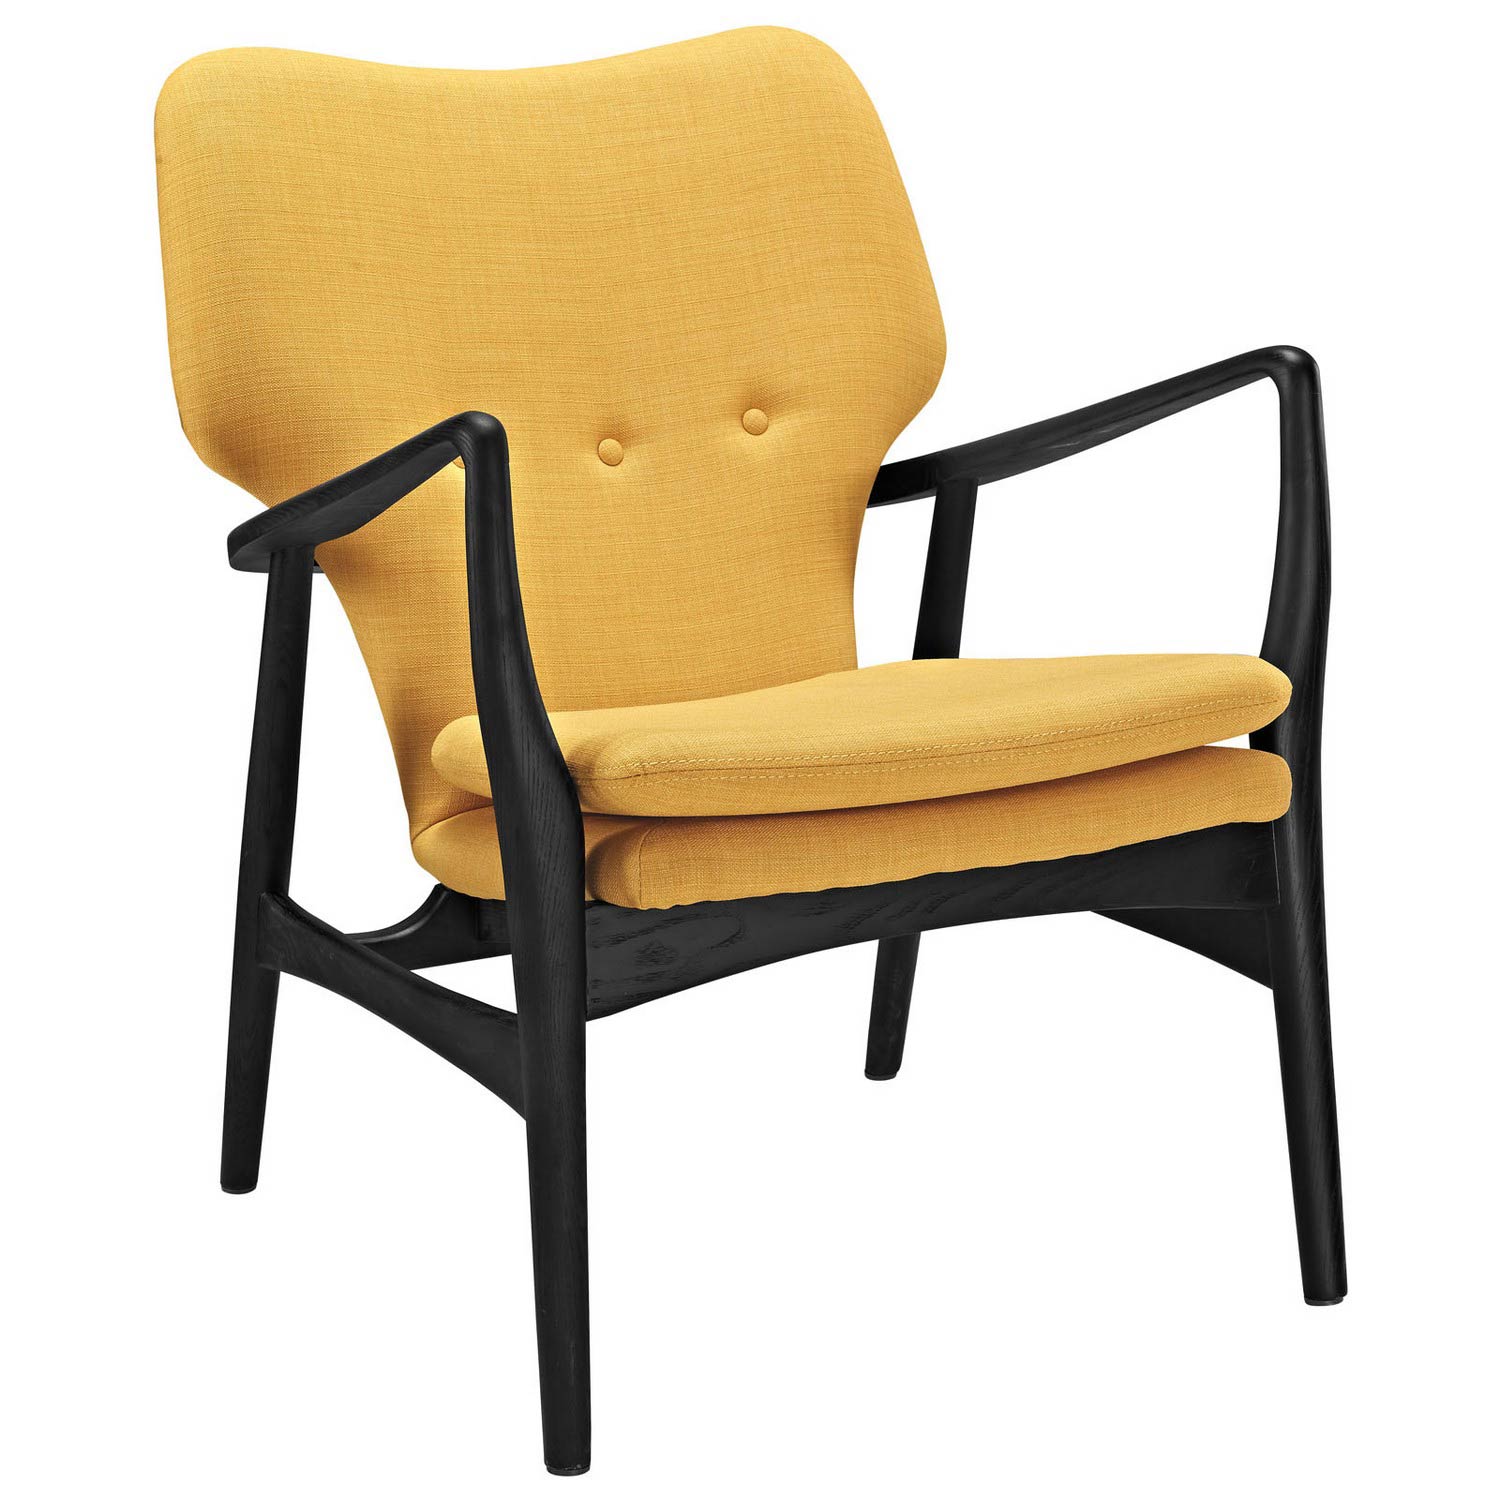 Modway Heed Lounge Chair - Black/Yellow